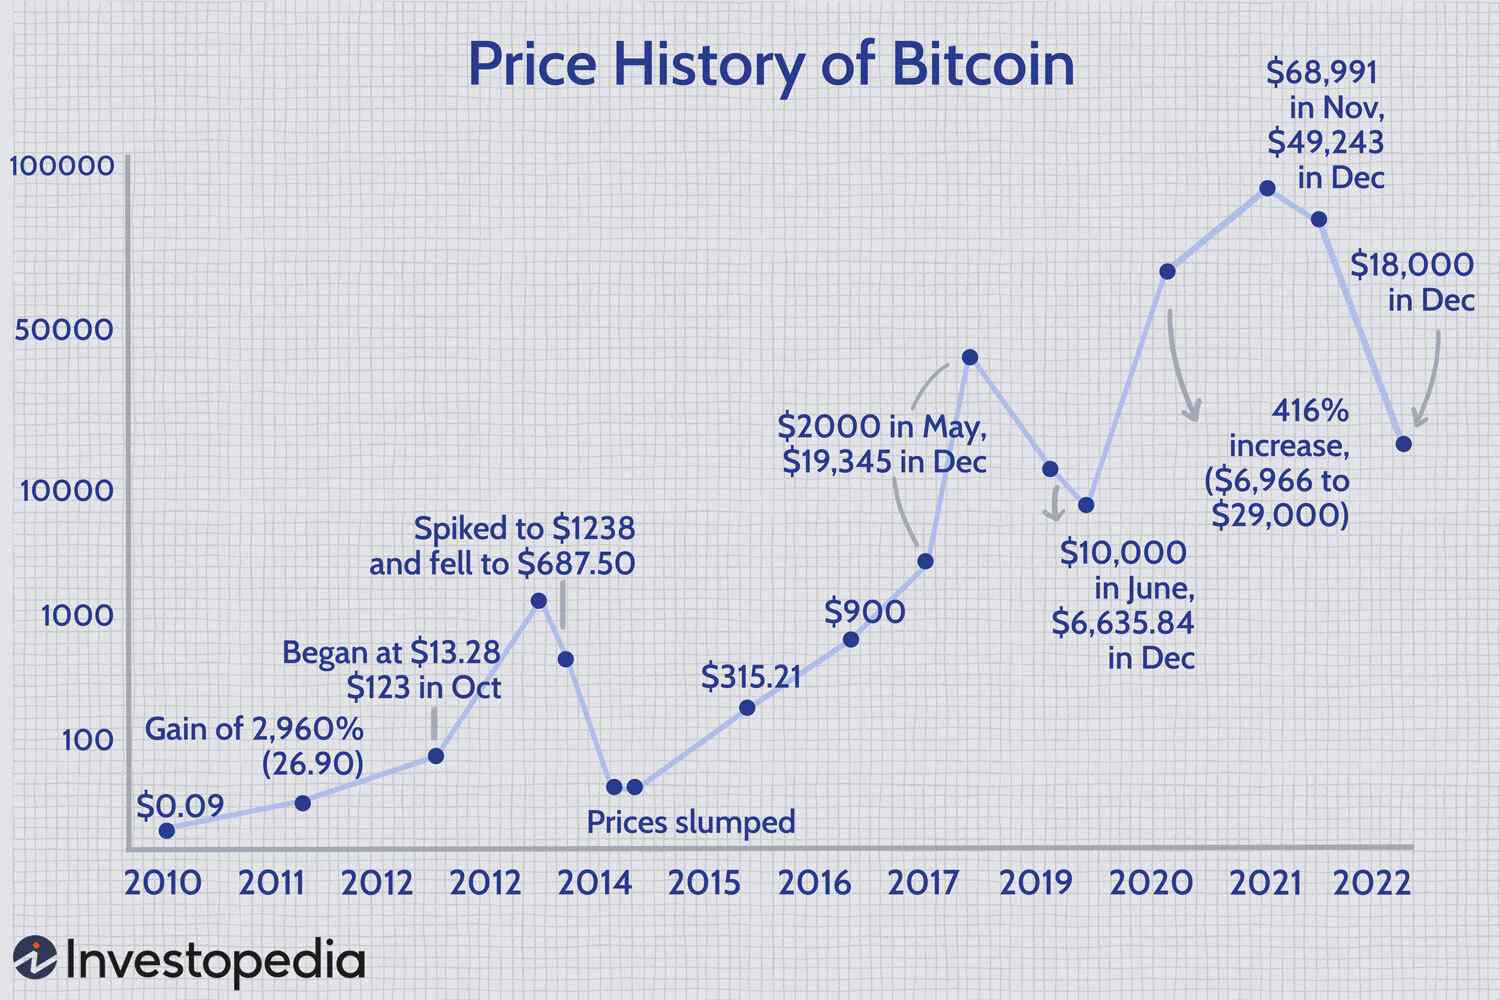 Why is the Price of Bitcoin Different Around the World?